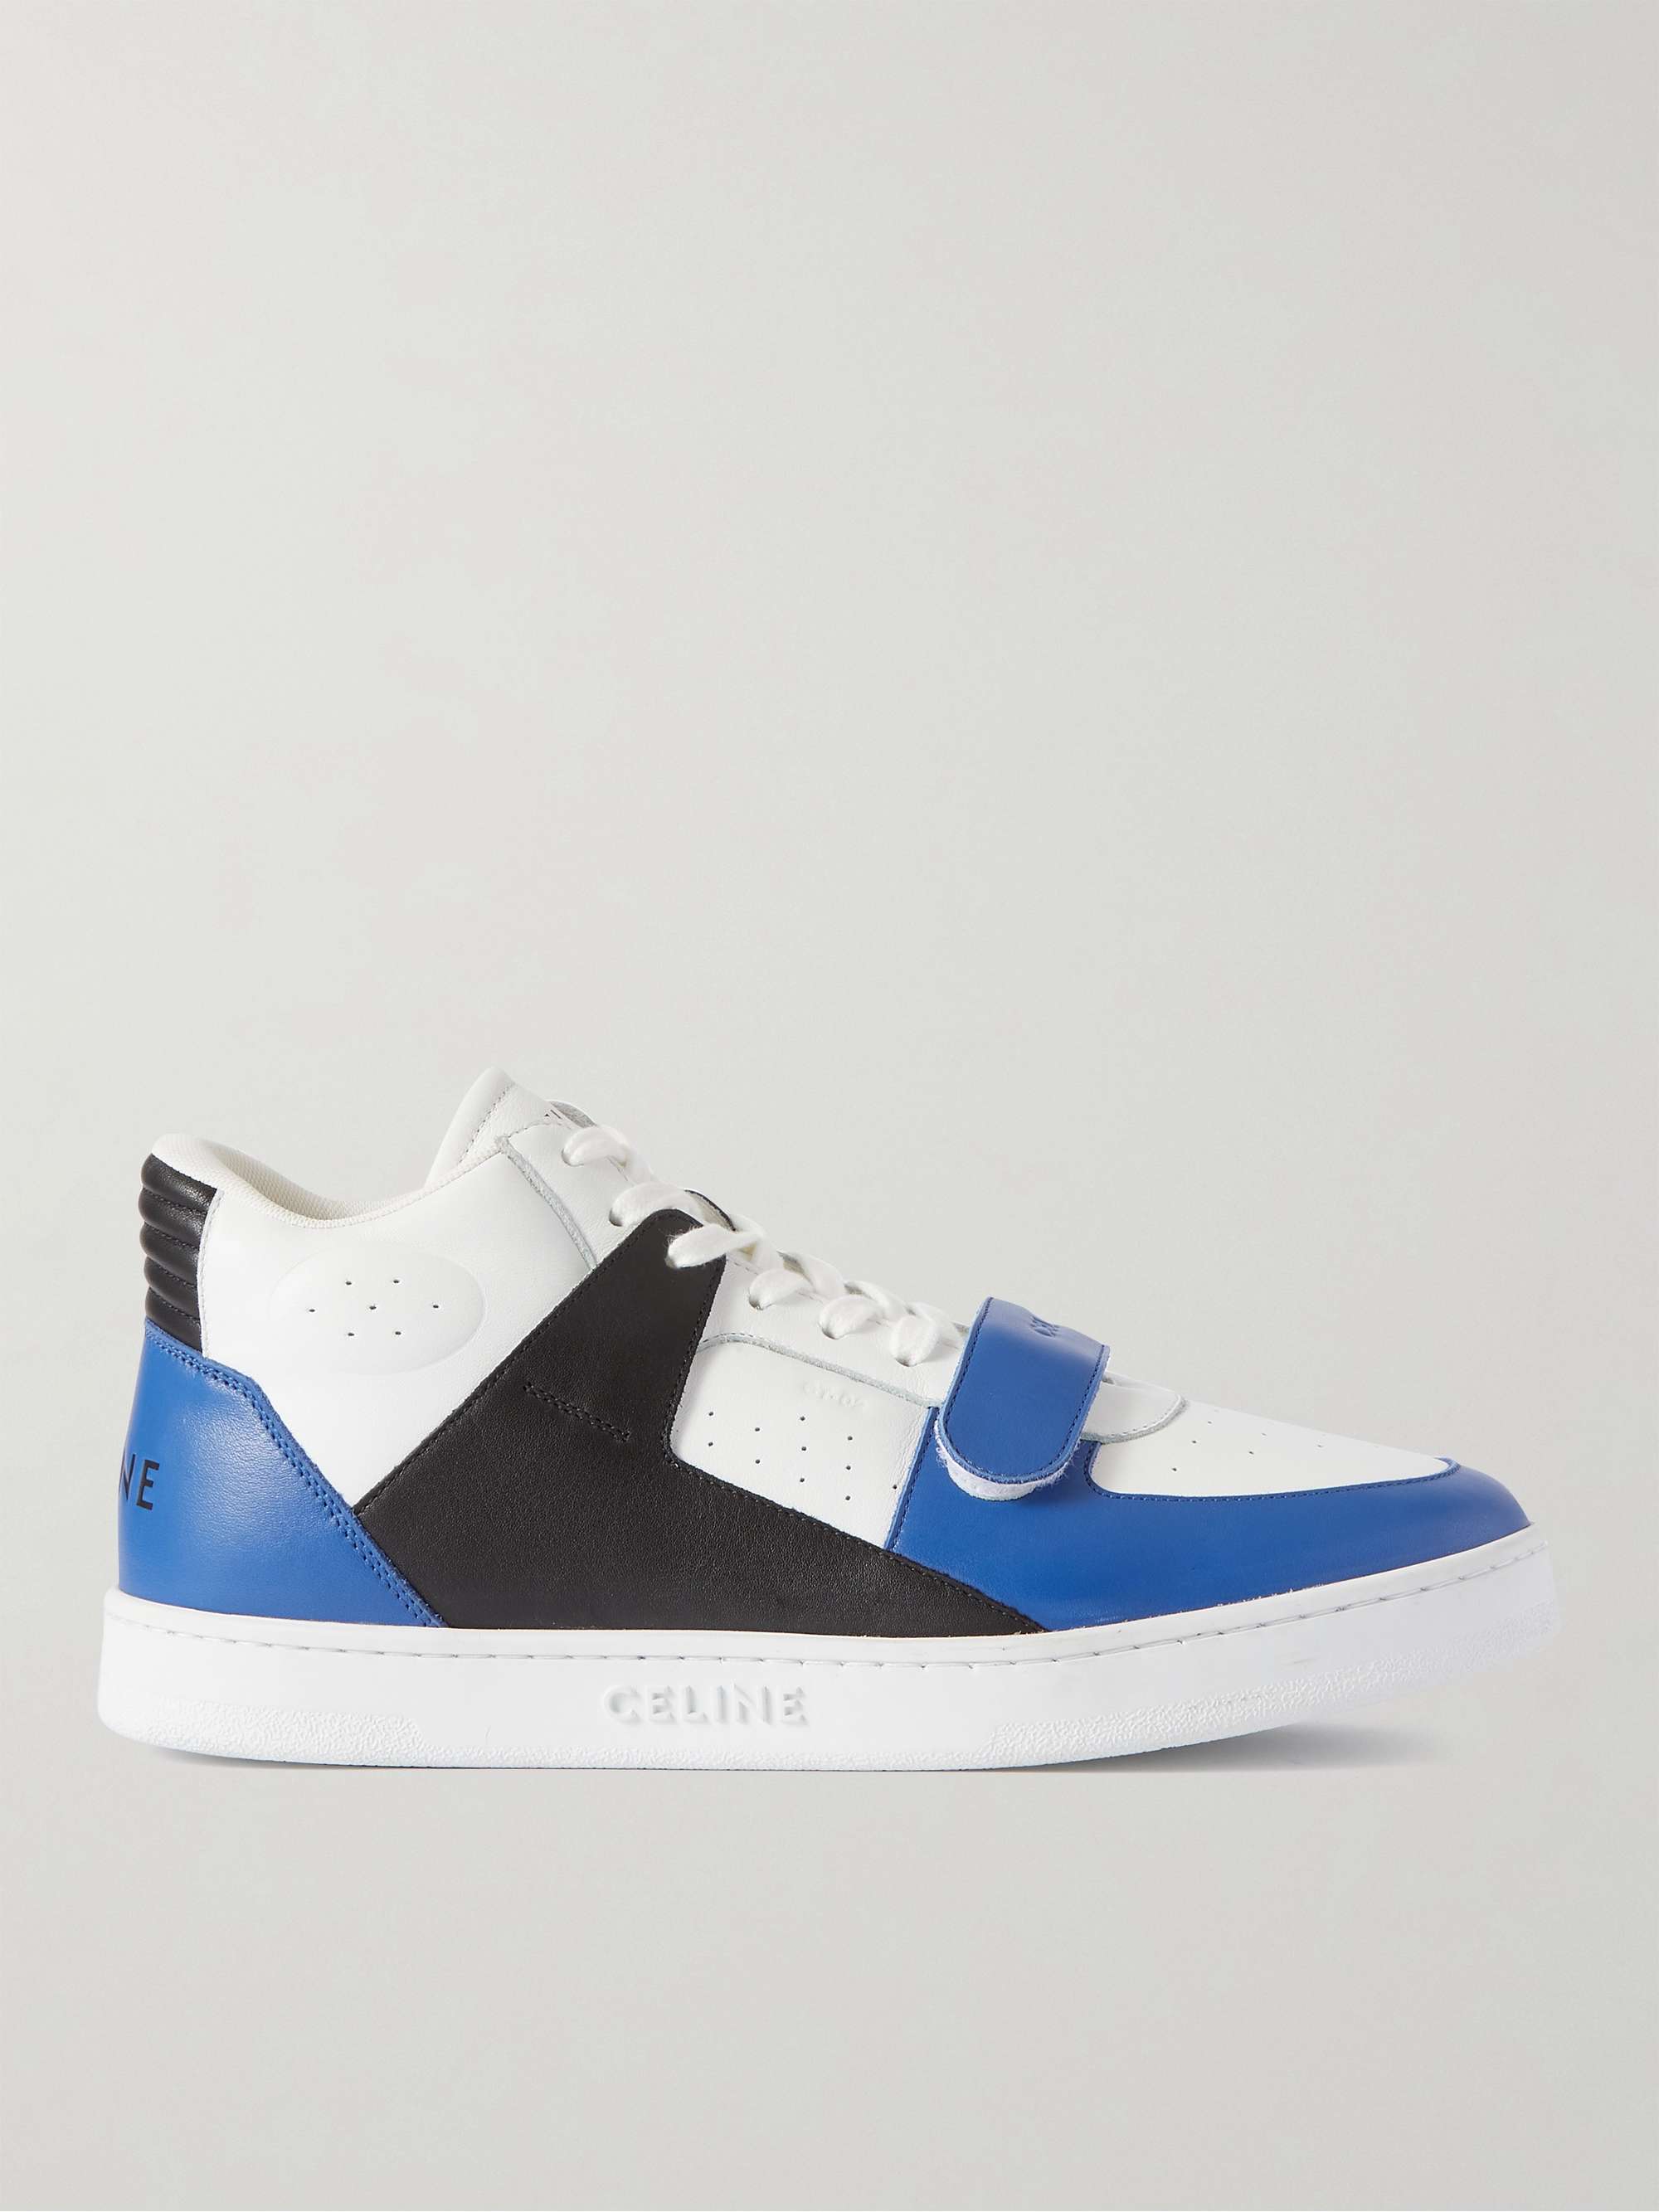 CELINE HOMME CT-02 Leather Sneakers | MR PORTER